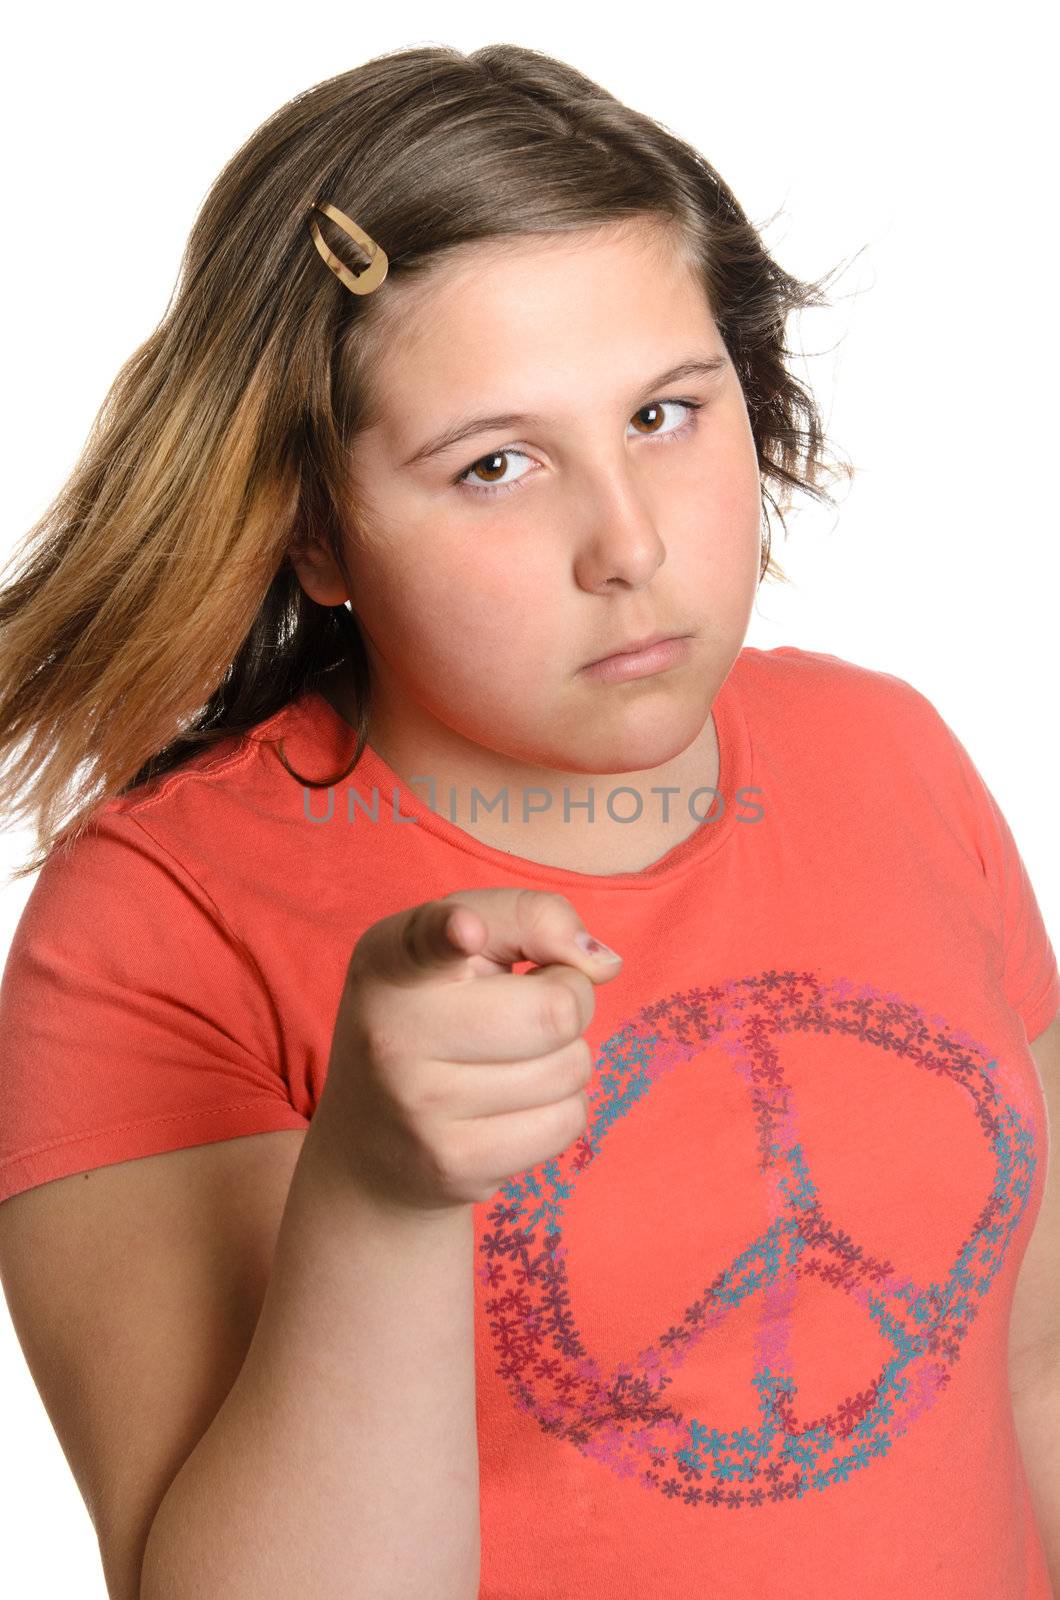 A young preteen girl giving the viewer heck or discipline for something, isolated against a white background.